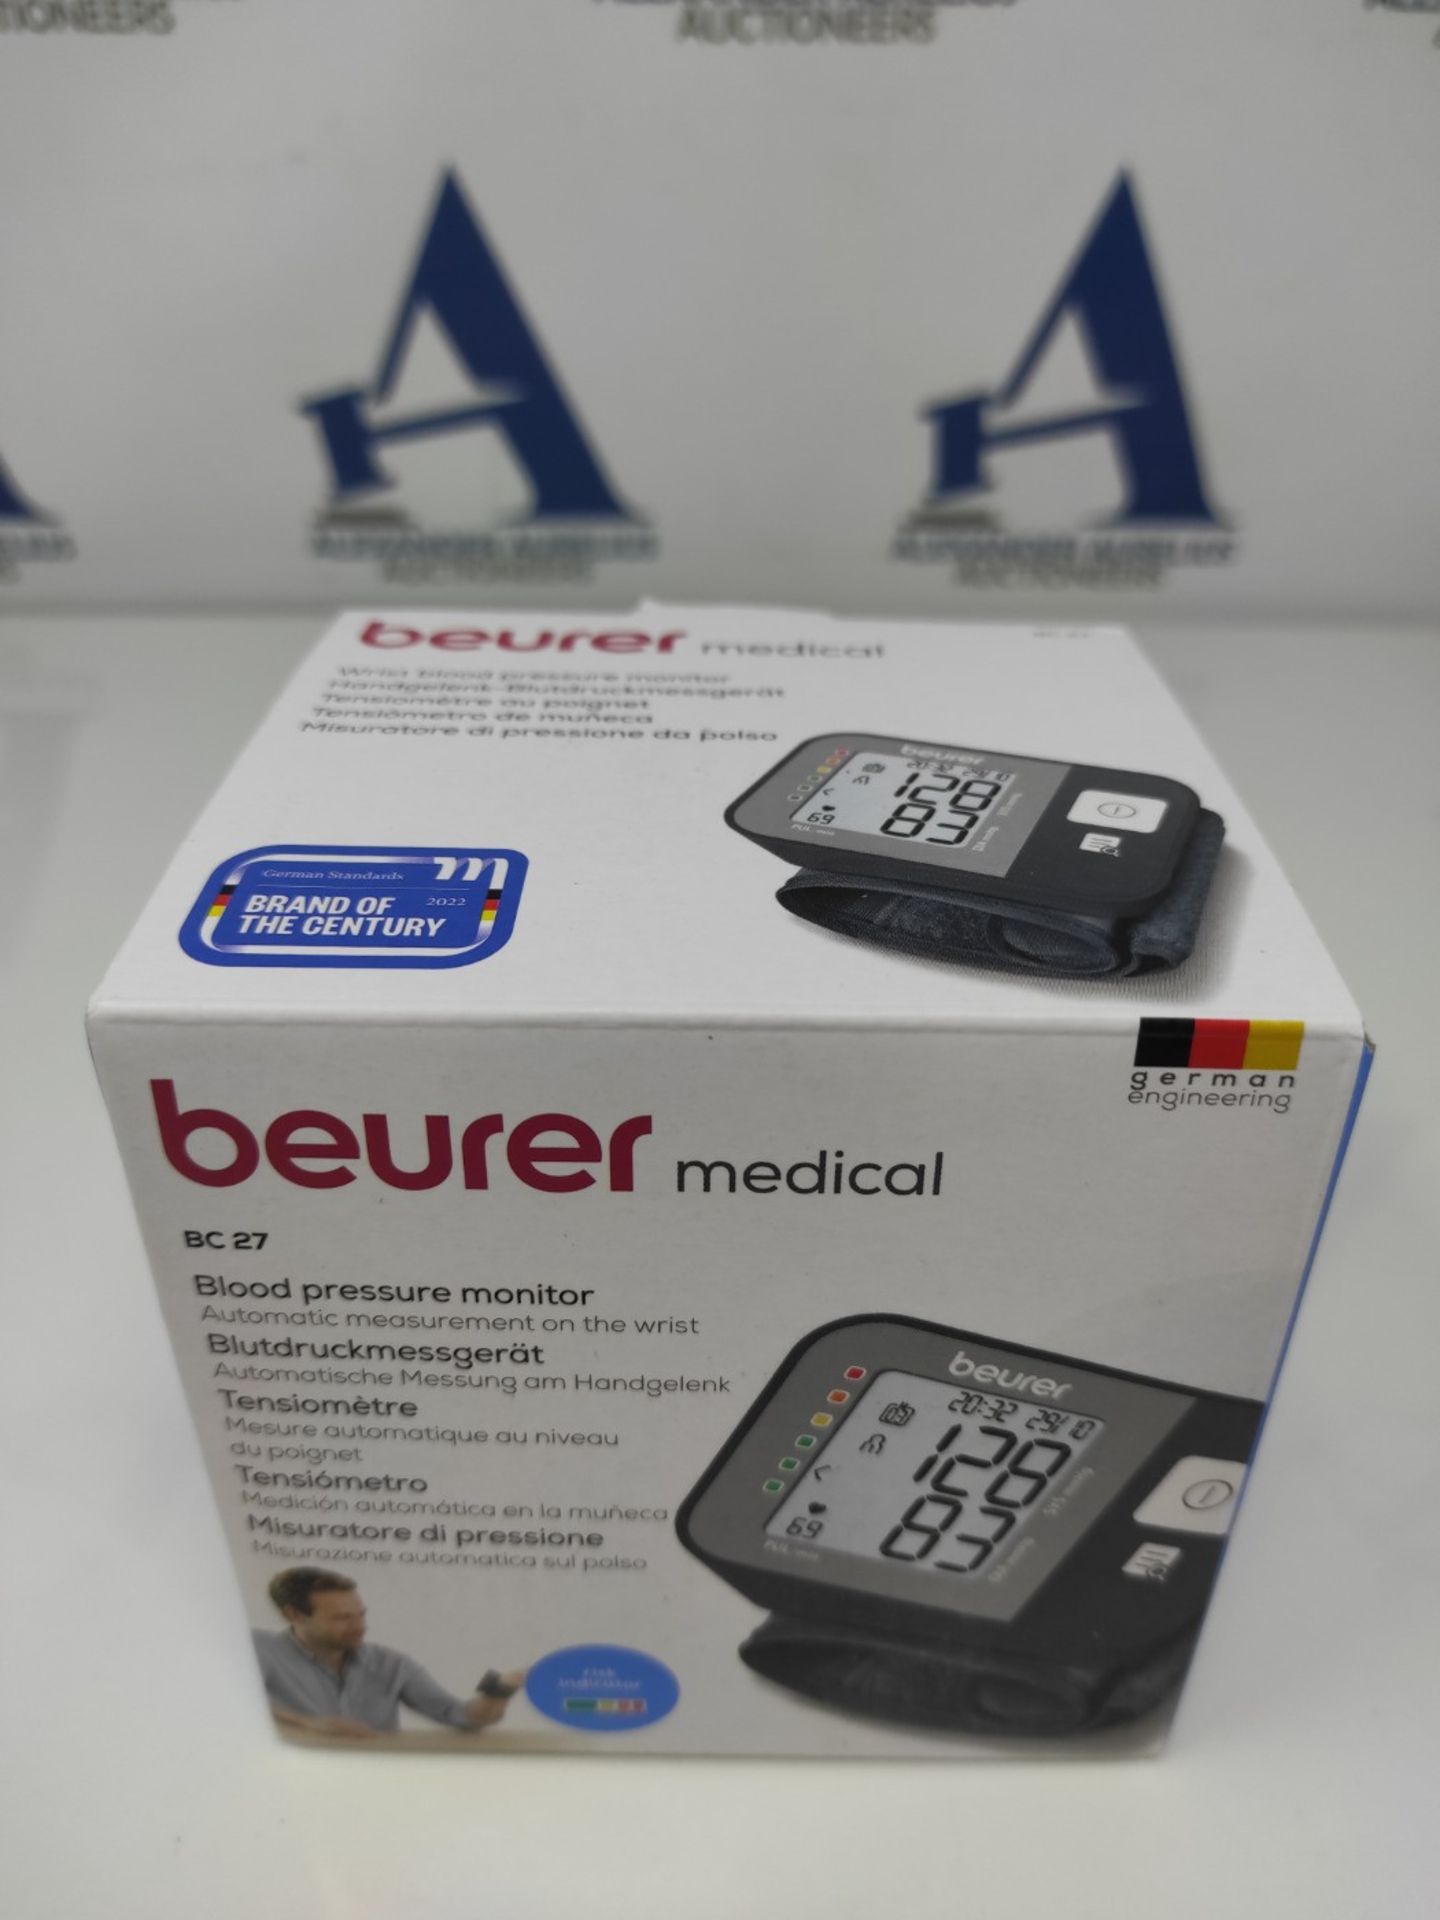 Beurer BC 27 Wrist Blood Pressure Monitor with Arrhythmia Detection, Fully Automatic M - Image 2 of 3